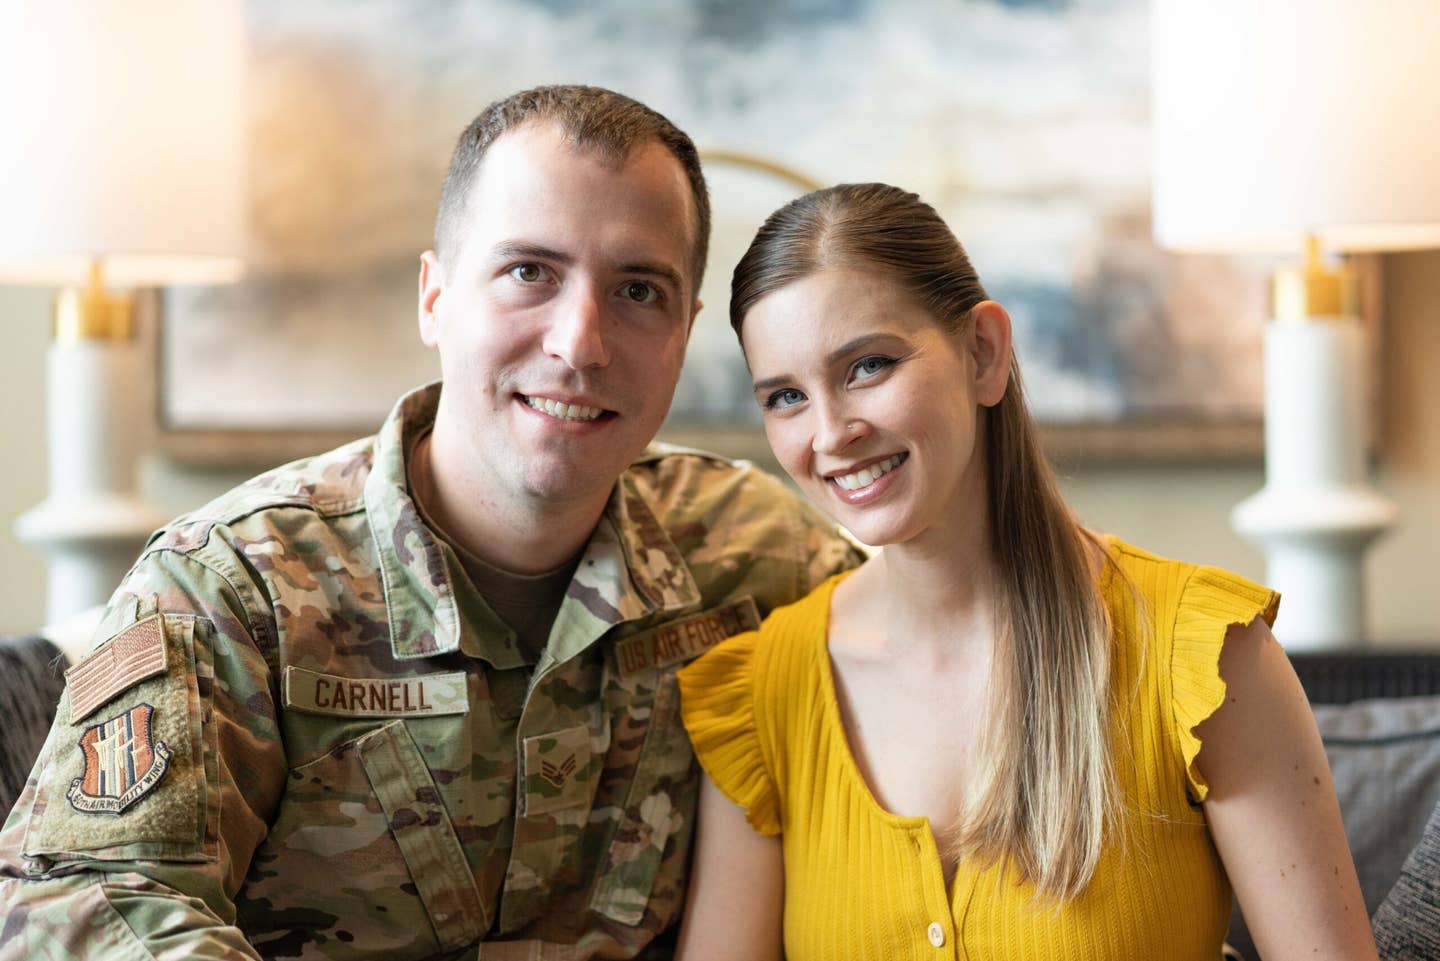 U.S. Air Force Senior Airman Jonathan Carnell, 60th Air Mobility Wing public affairs specialist from Travis Air Force Base, California, and his spouse, Micah. (U.S. Air Force photo by Chustine Minoda)